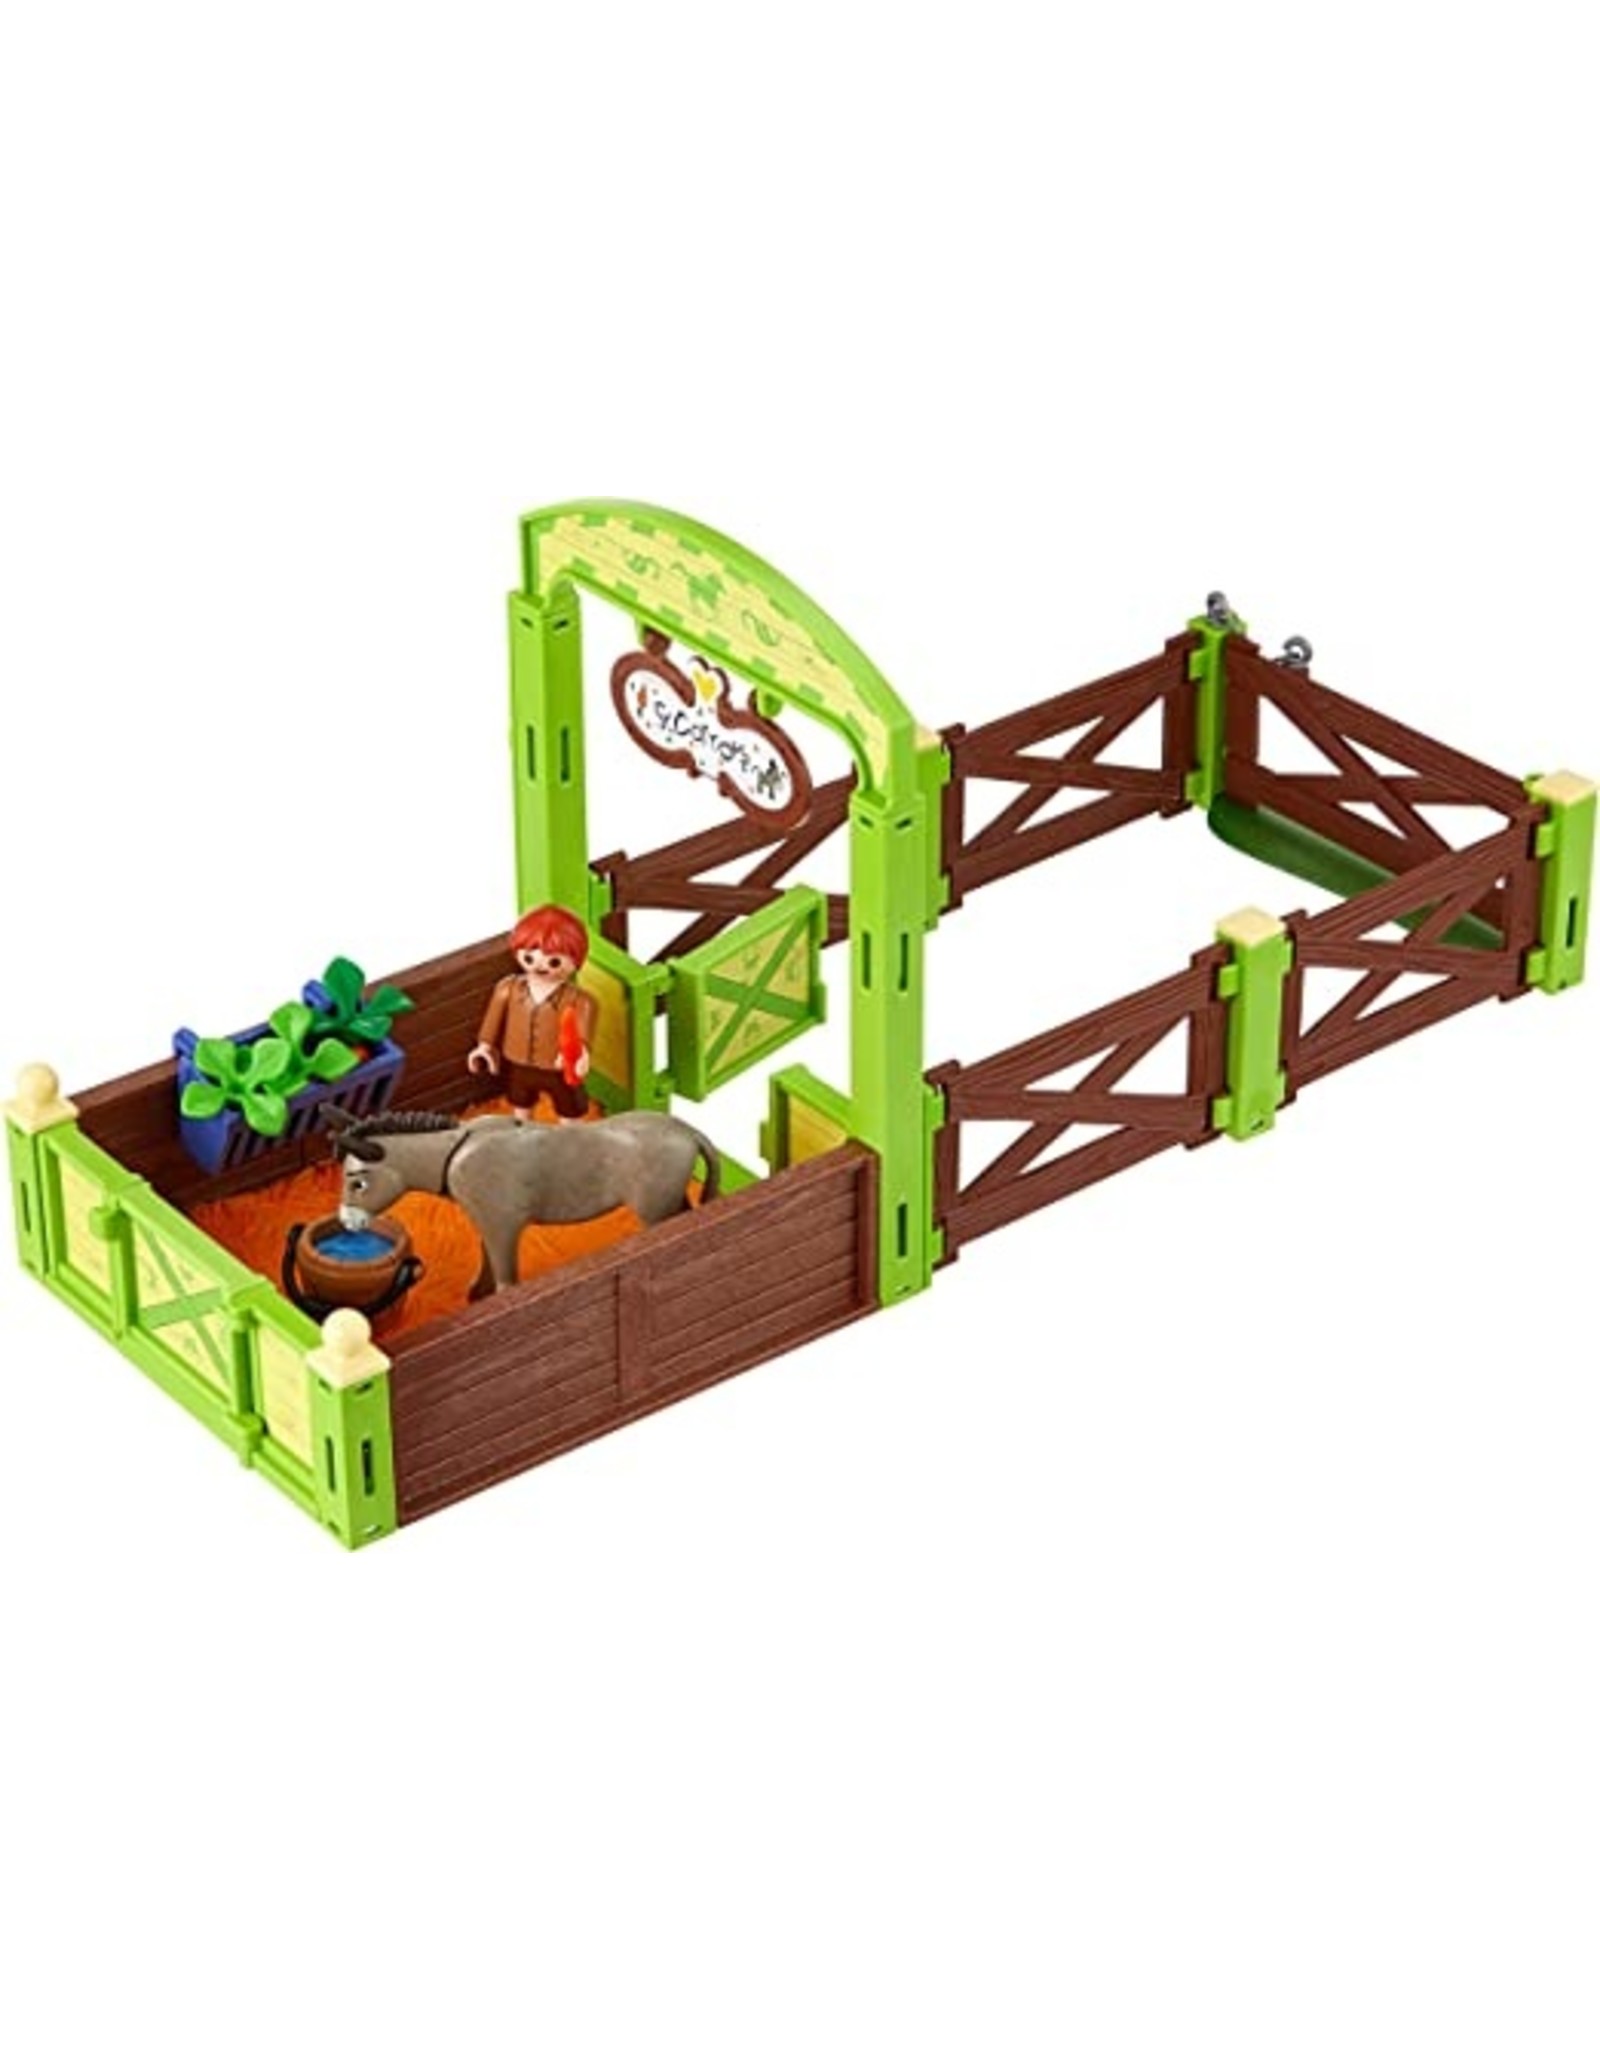 Snips & Senor Carrots with Horse Stall 70120